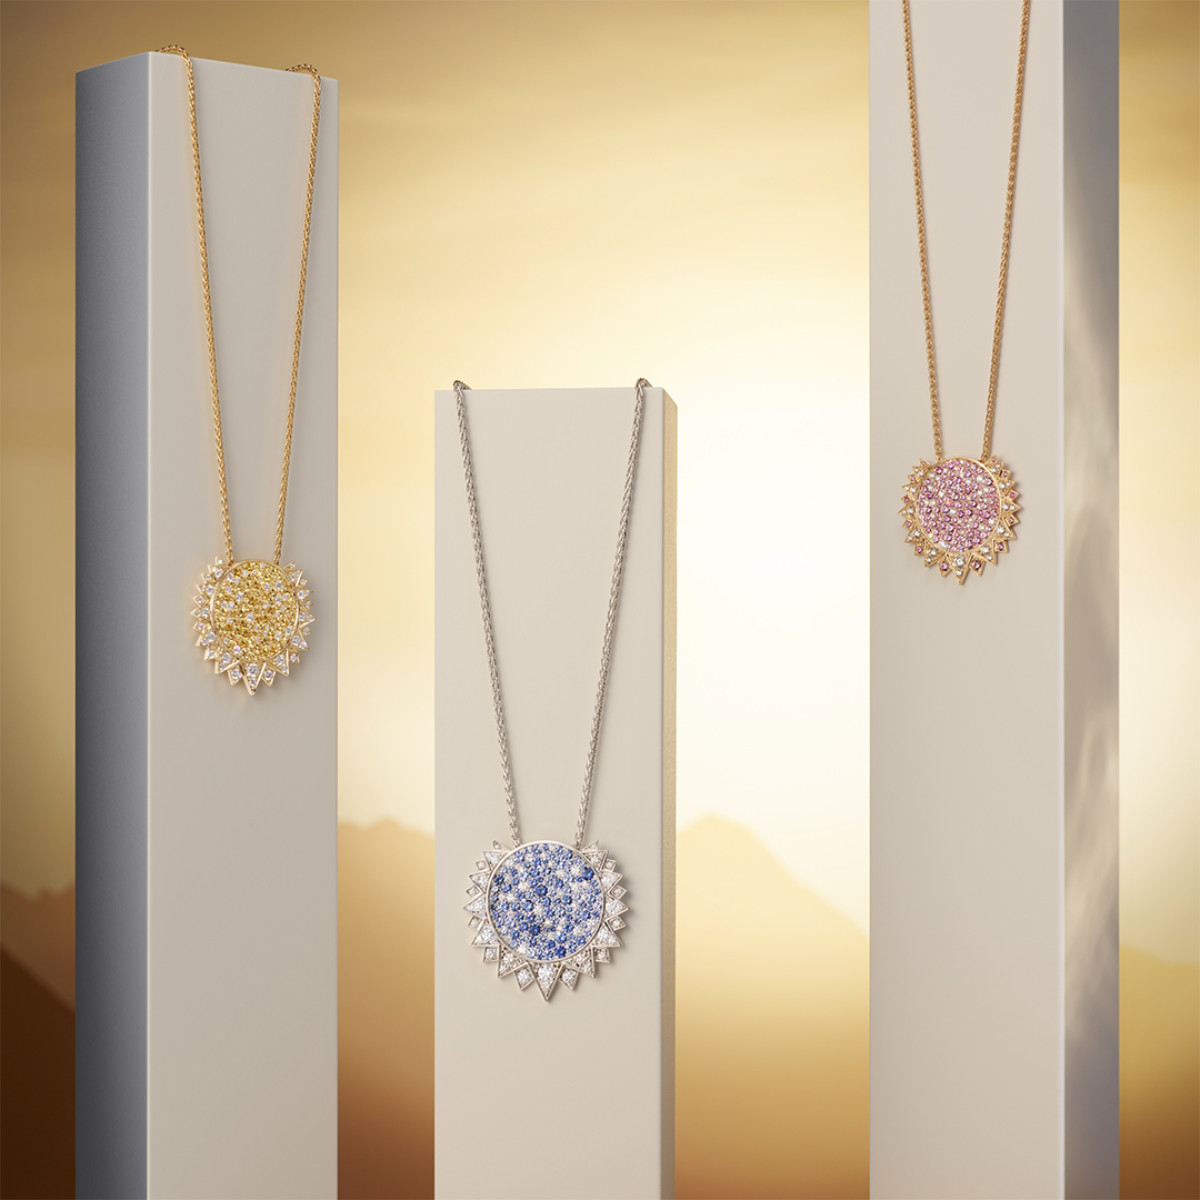 Piaget Presents Its New Sunlight Collection